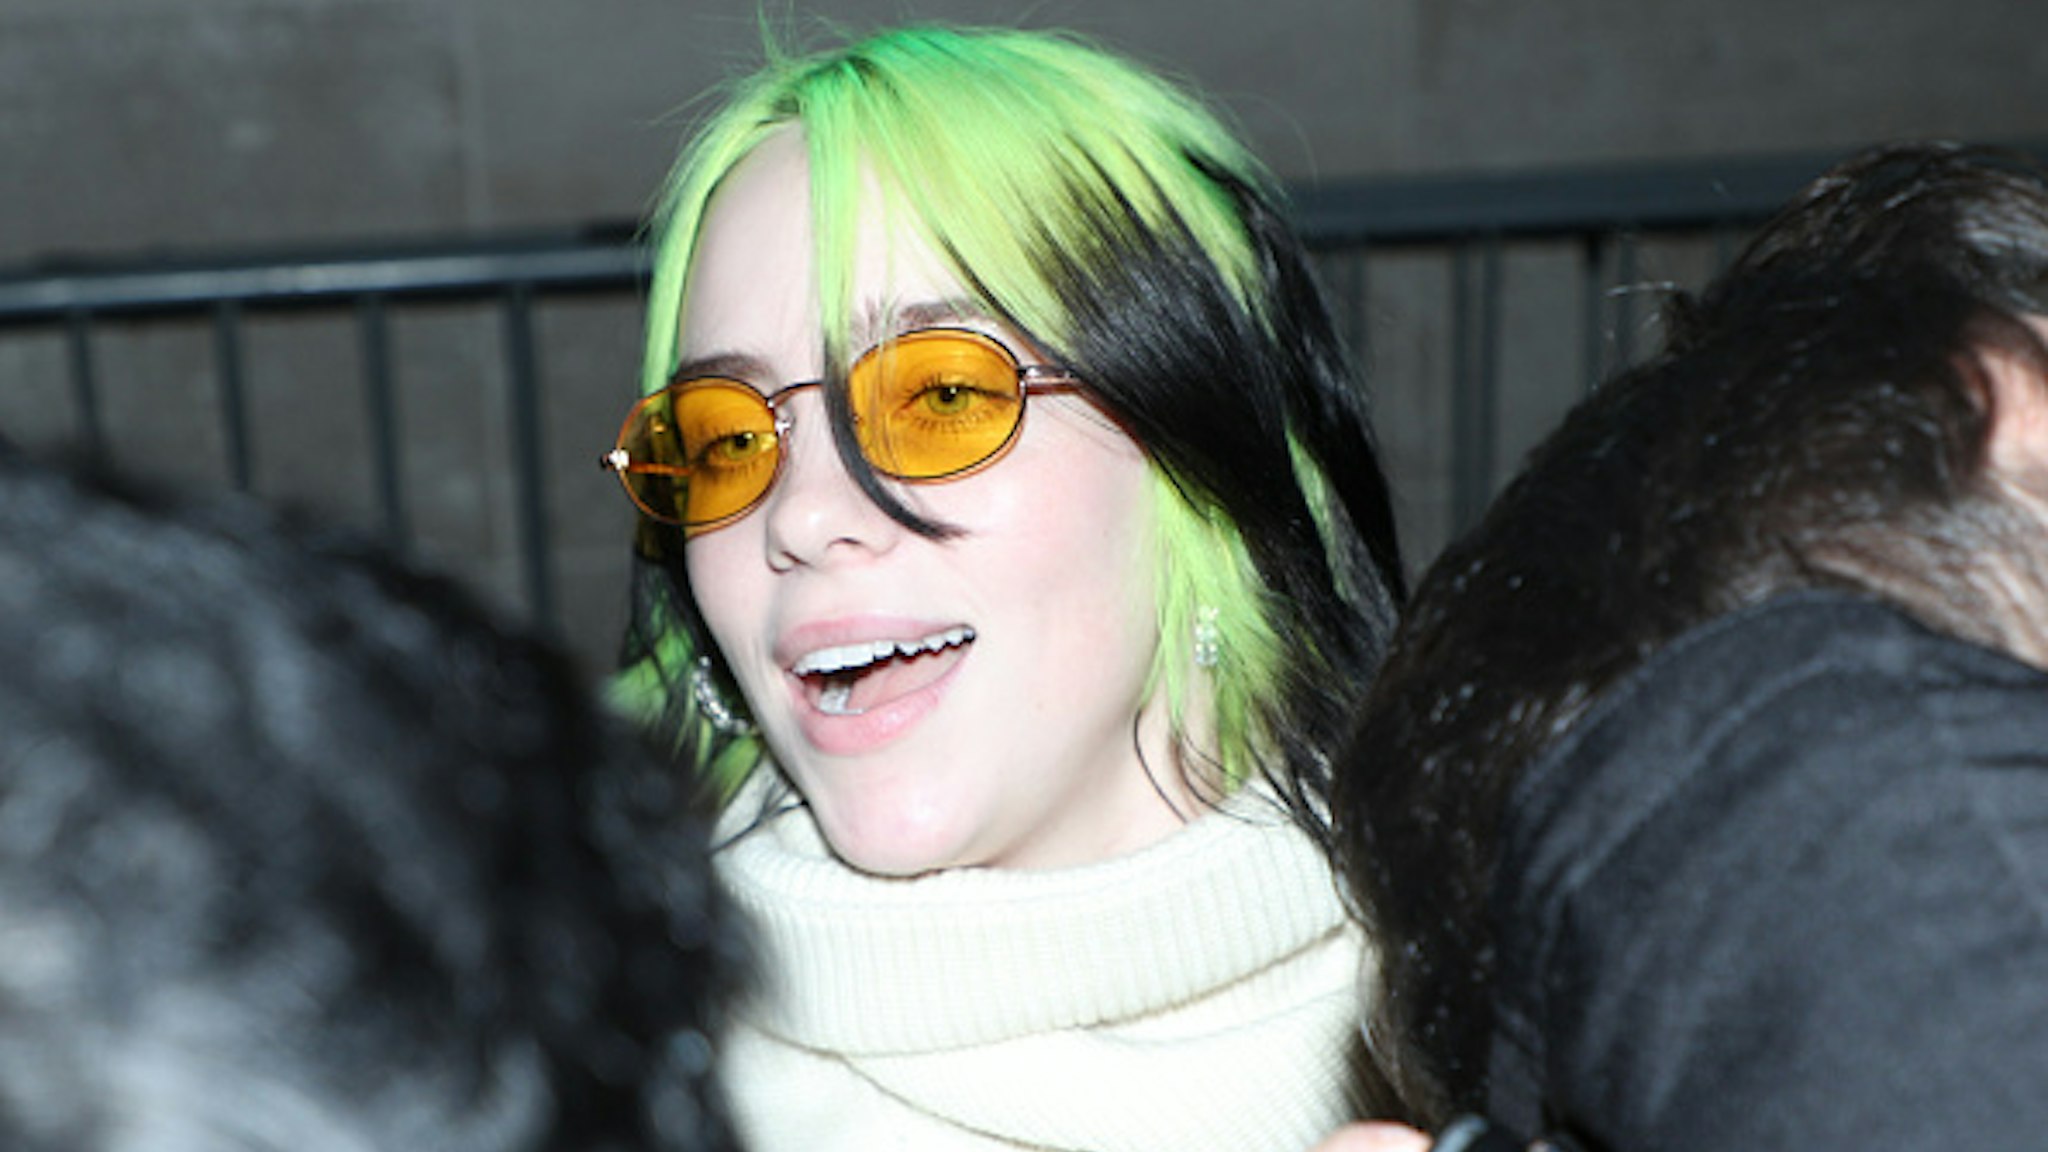 Billie Eilish leaves BBC Broadcasting House in London, after co-hosting with Nick Grimshaw on BBC Radio 1.